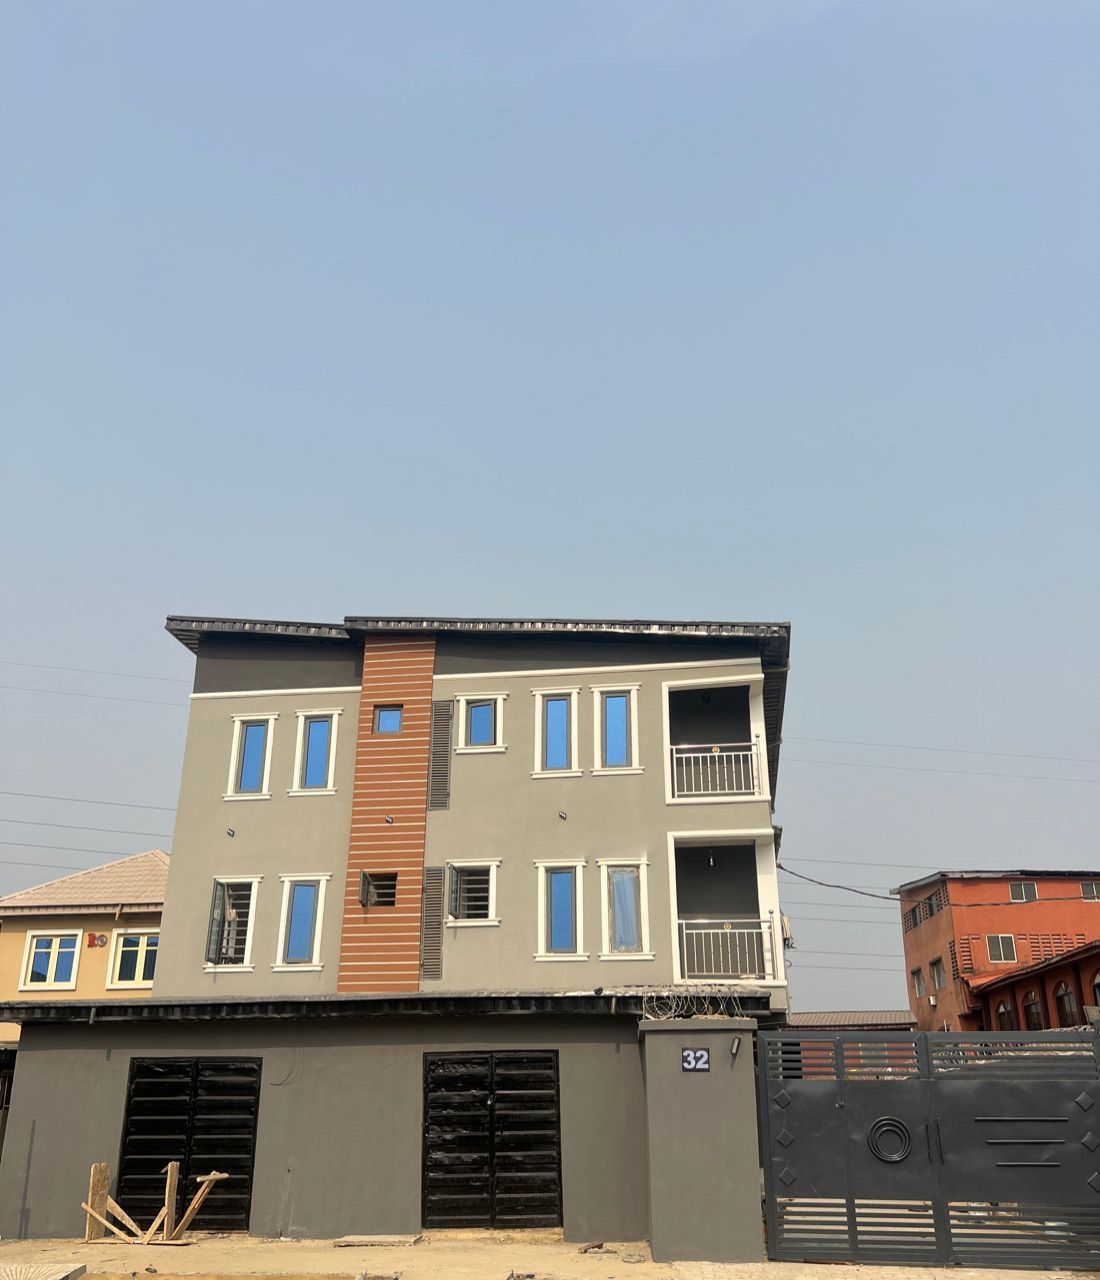 Stella Homes For Rent (20 years Lease), Gbagada, Lagos, Property